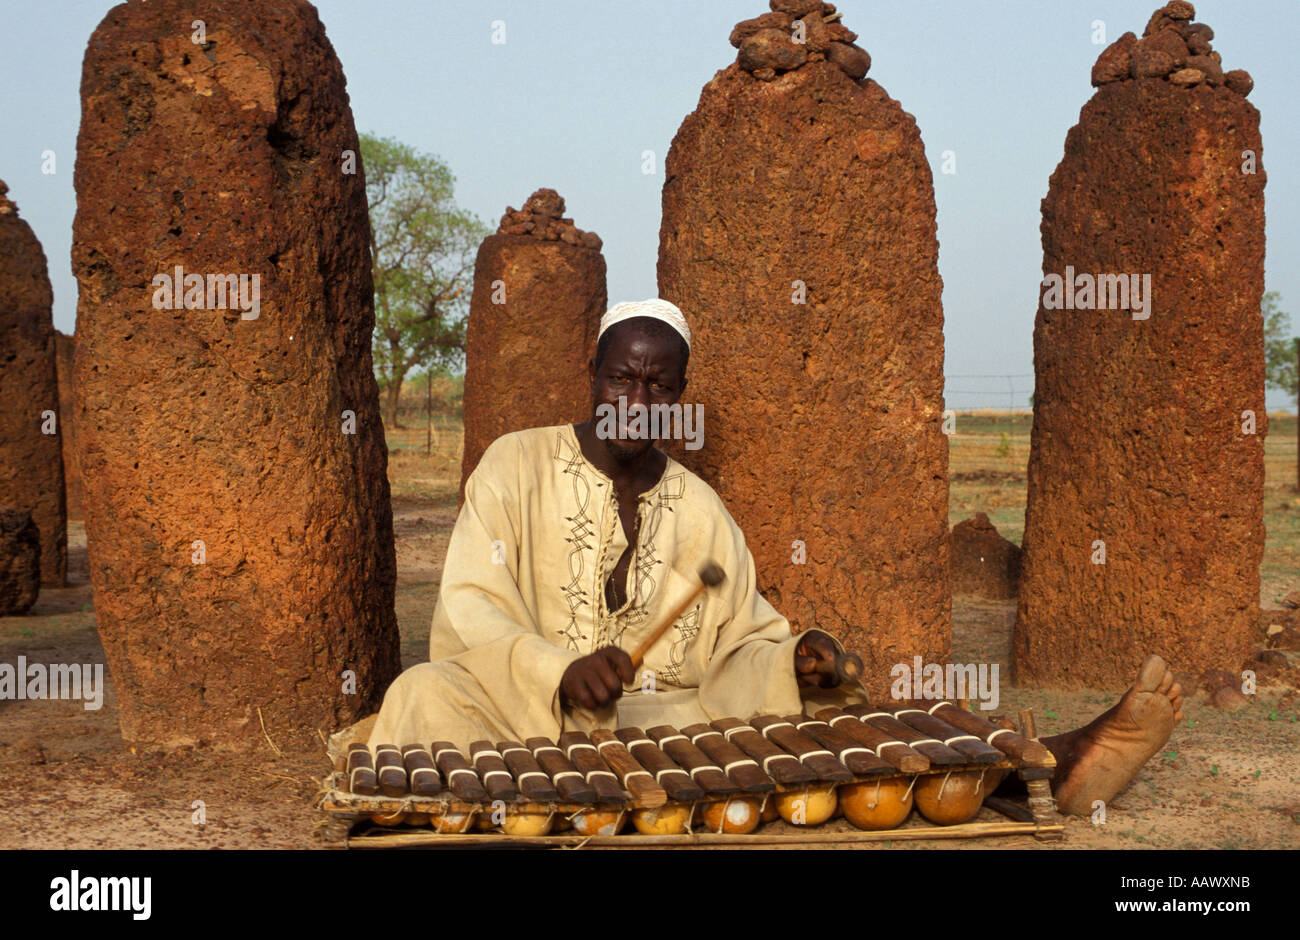 Xylophonist at the Wassu stone circles dating from 500 to 1000 AD, Wassu, the Gambia Stock Photo